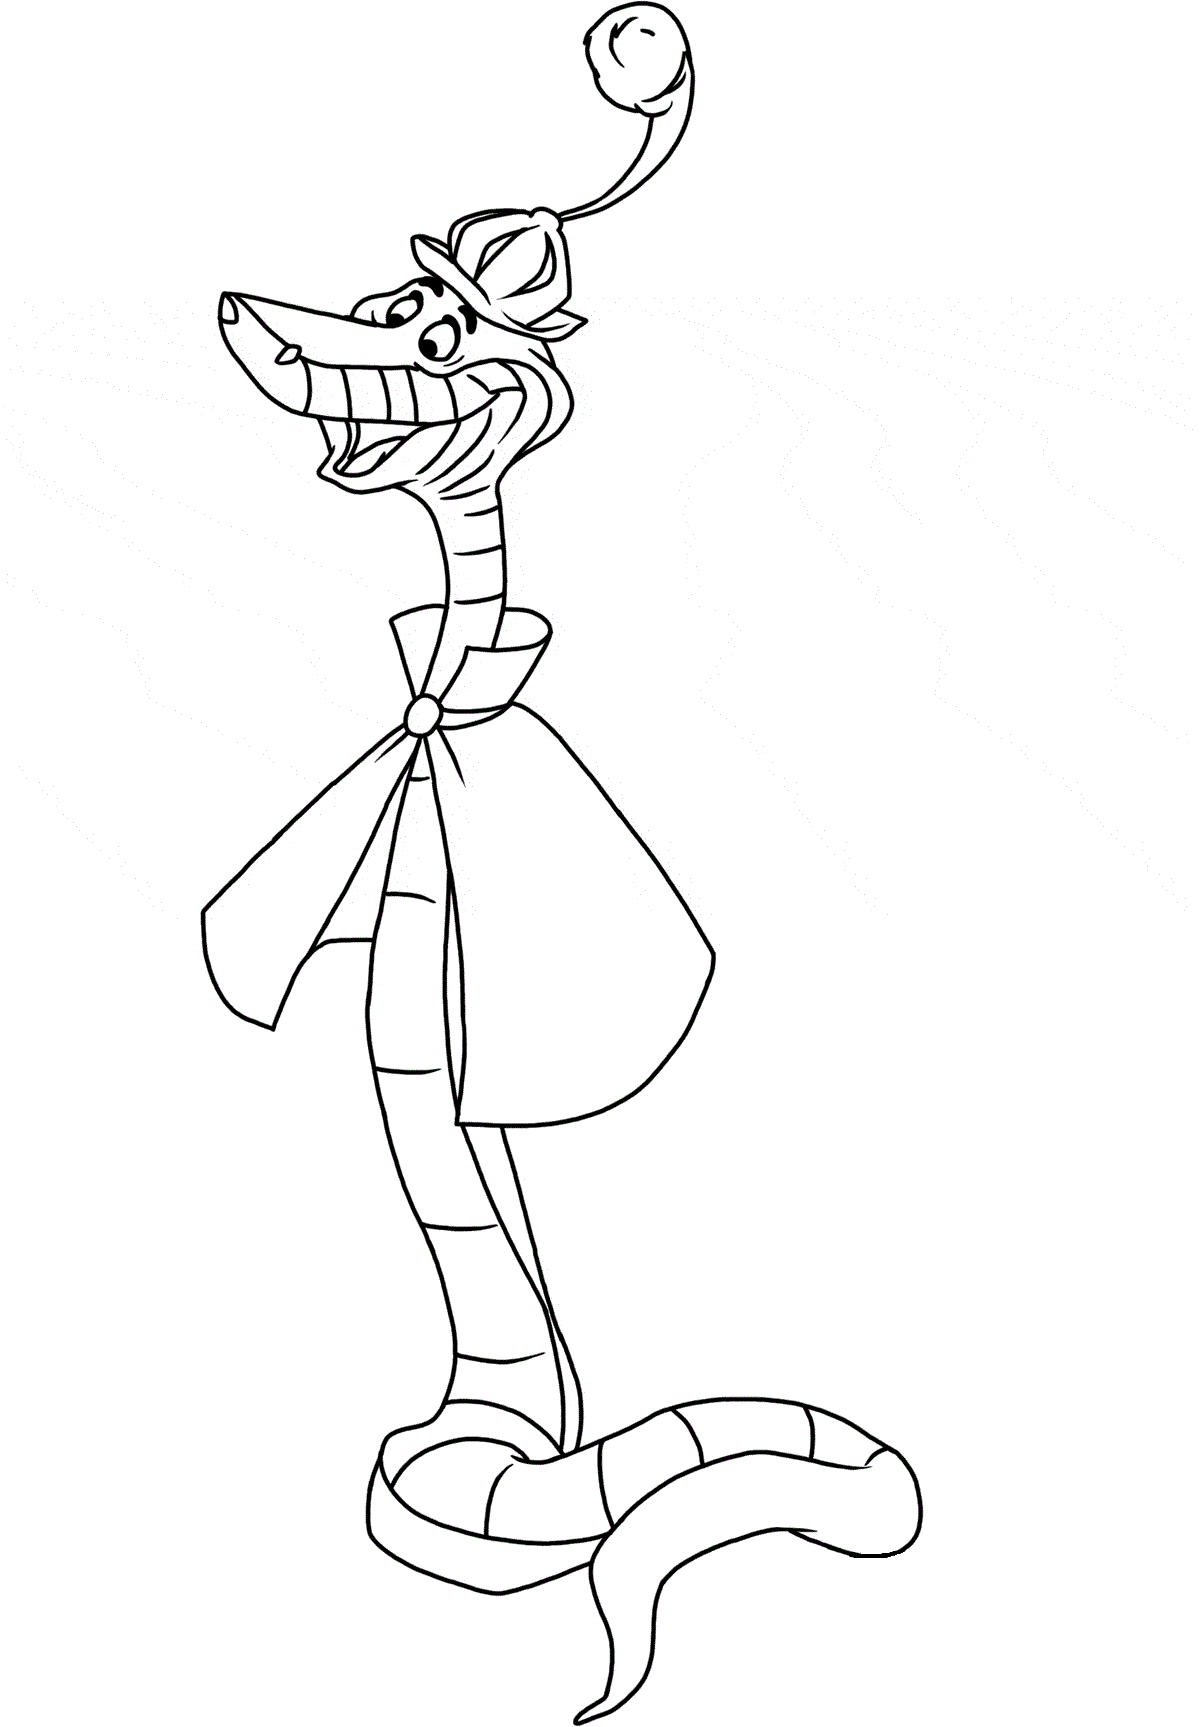 Robin Hood Snake Coloring Pages